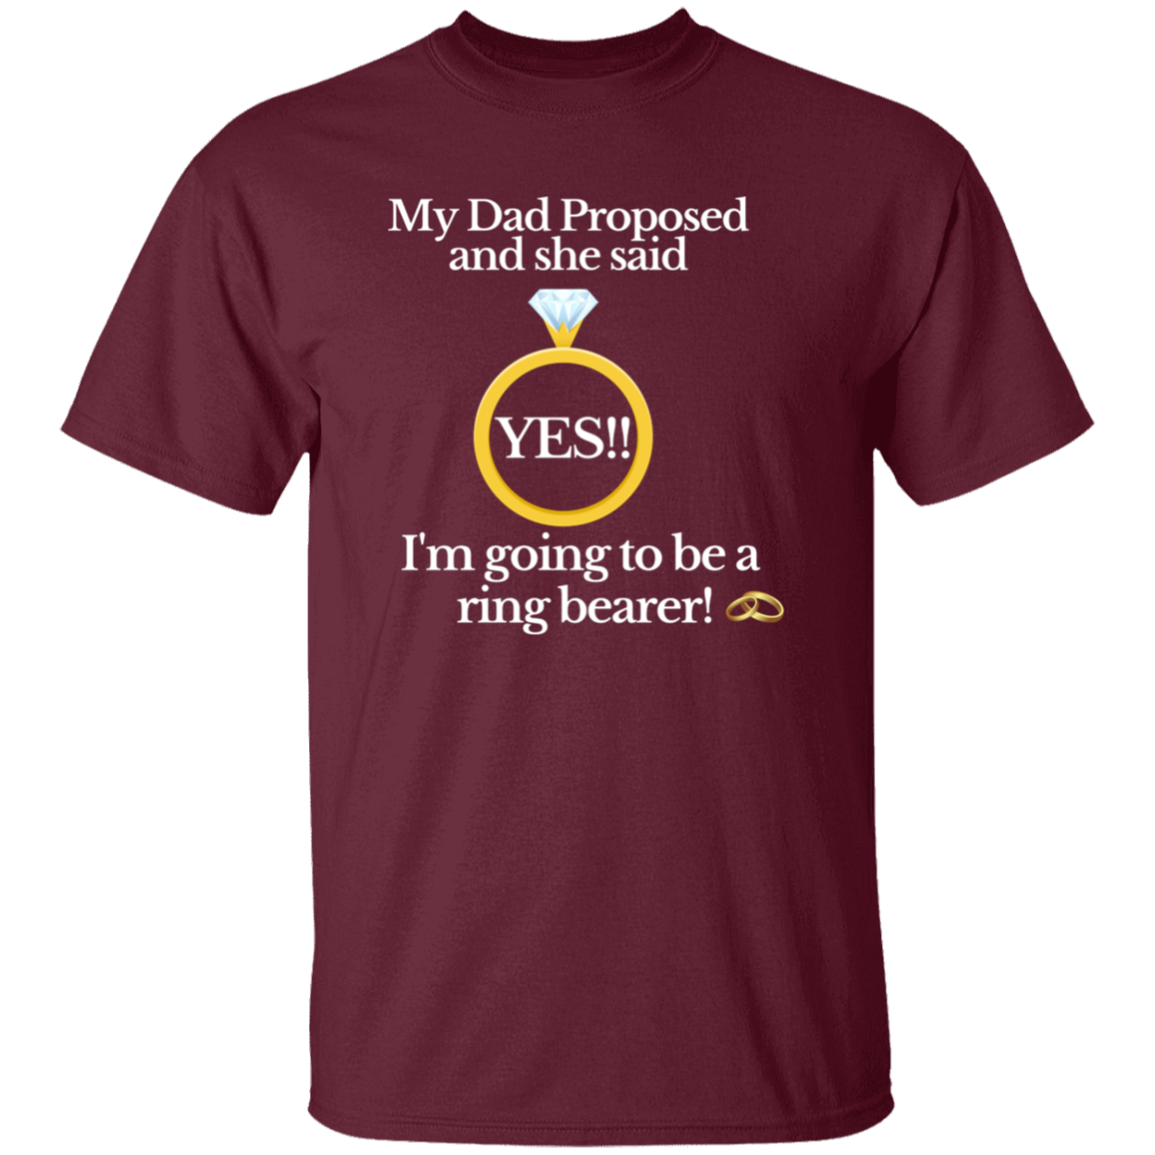 yes dad ring bearer black Youth 100% Cotton T-Shirt